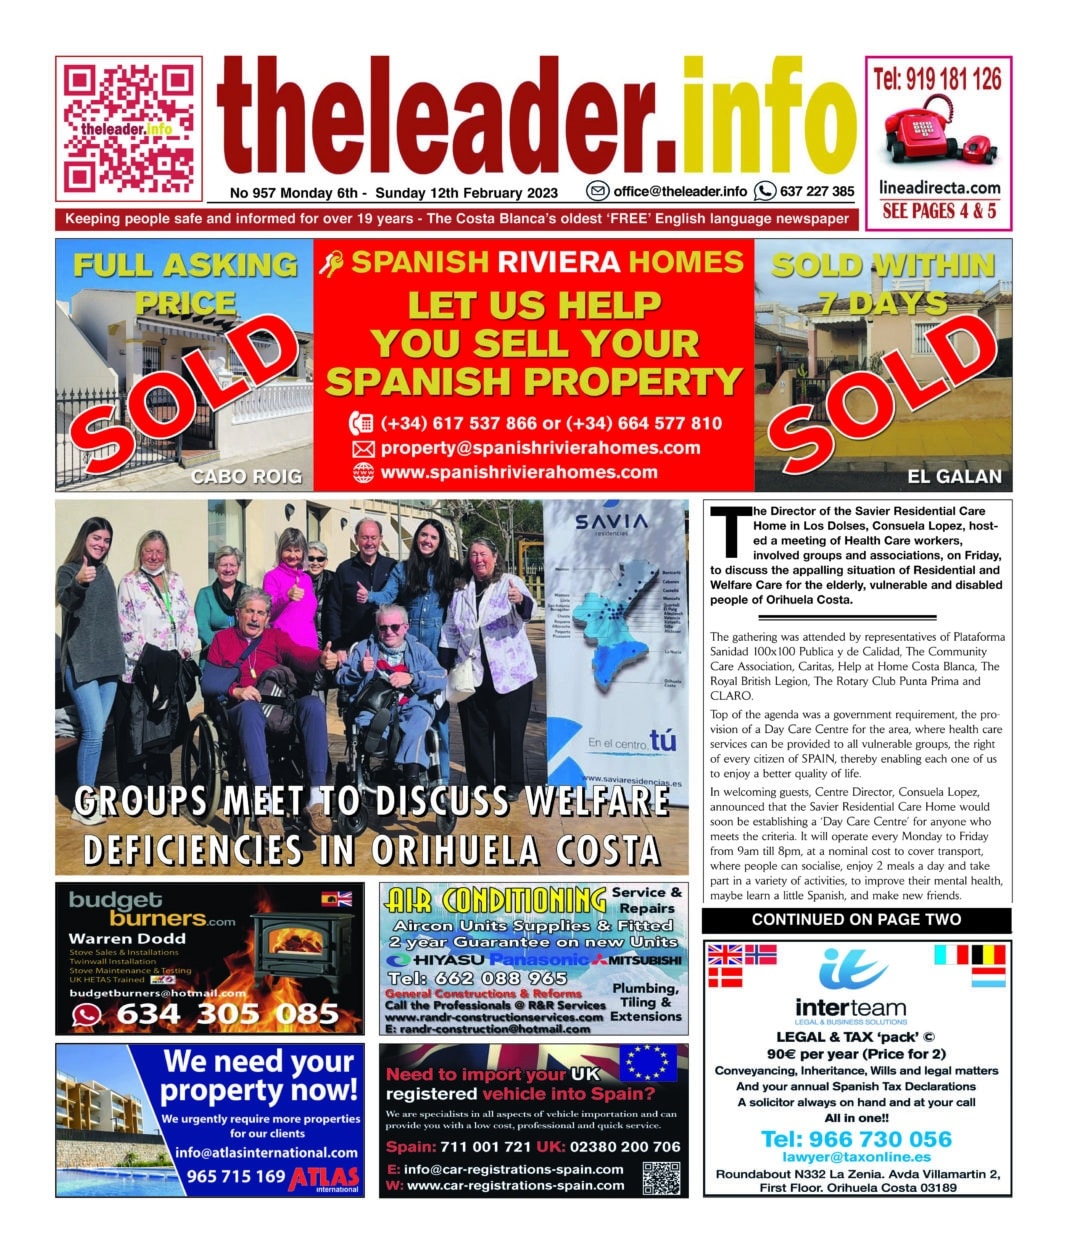 The Leader Newspaper 06 February 23 – Edition 957